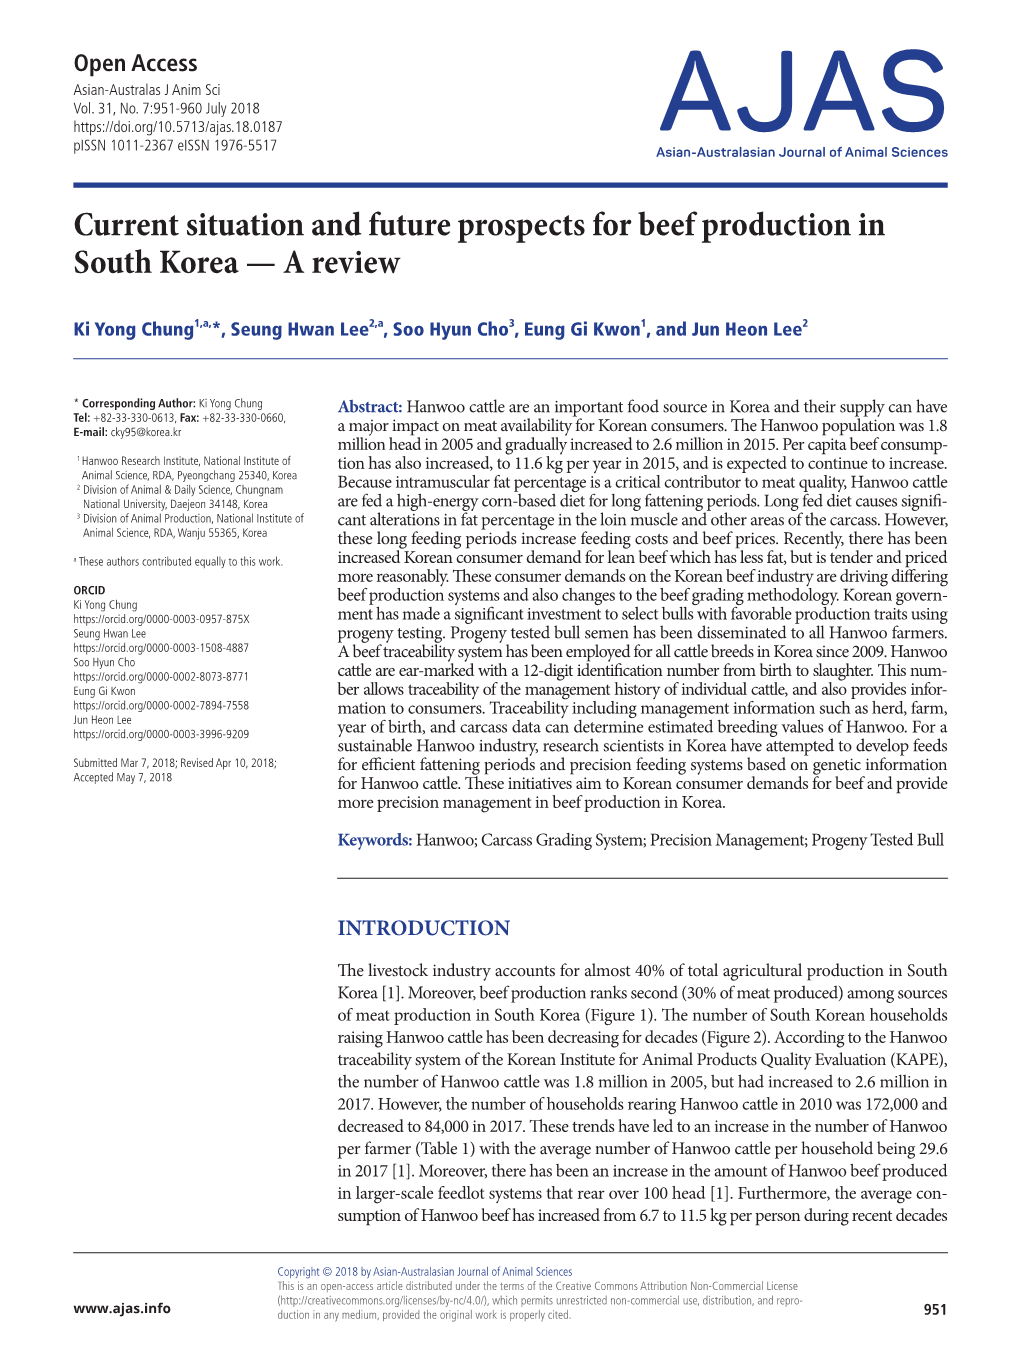 Current Situation and Future Prospects for Beef Production in South Korea — a Review